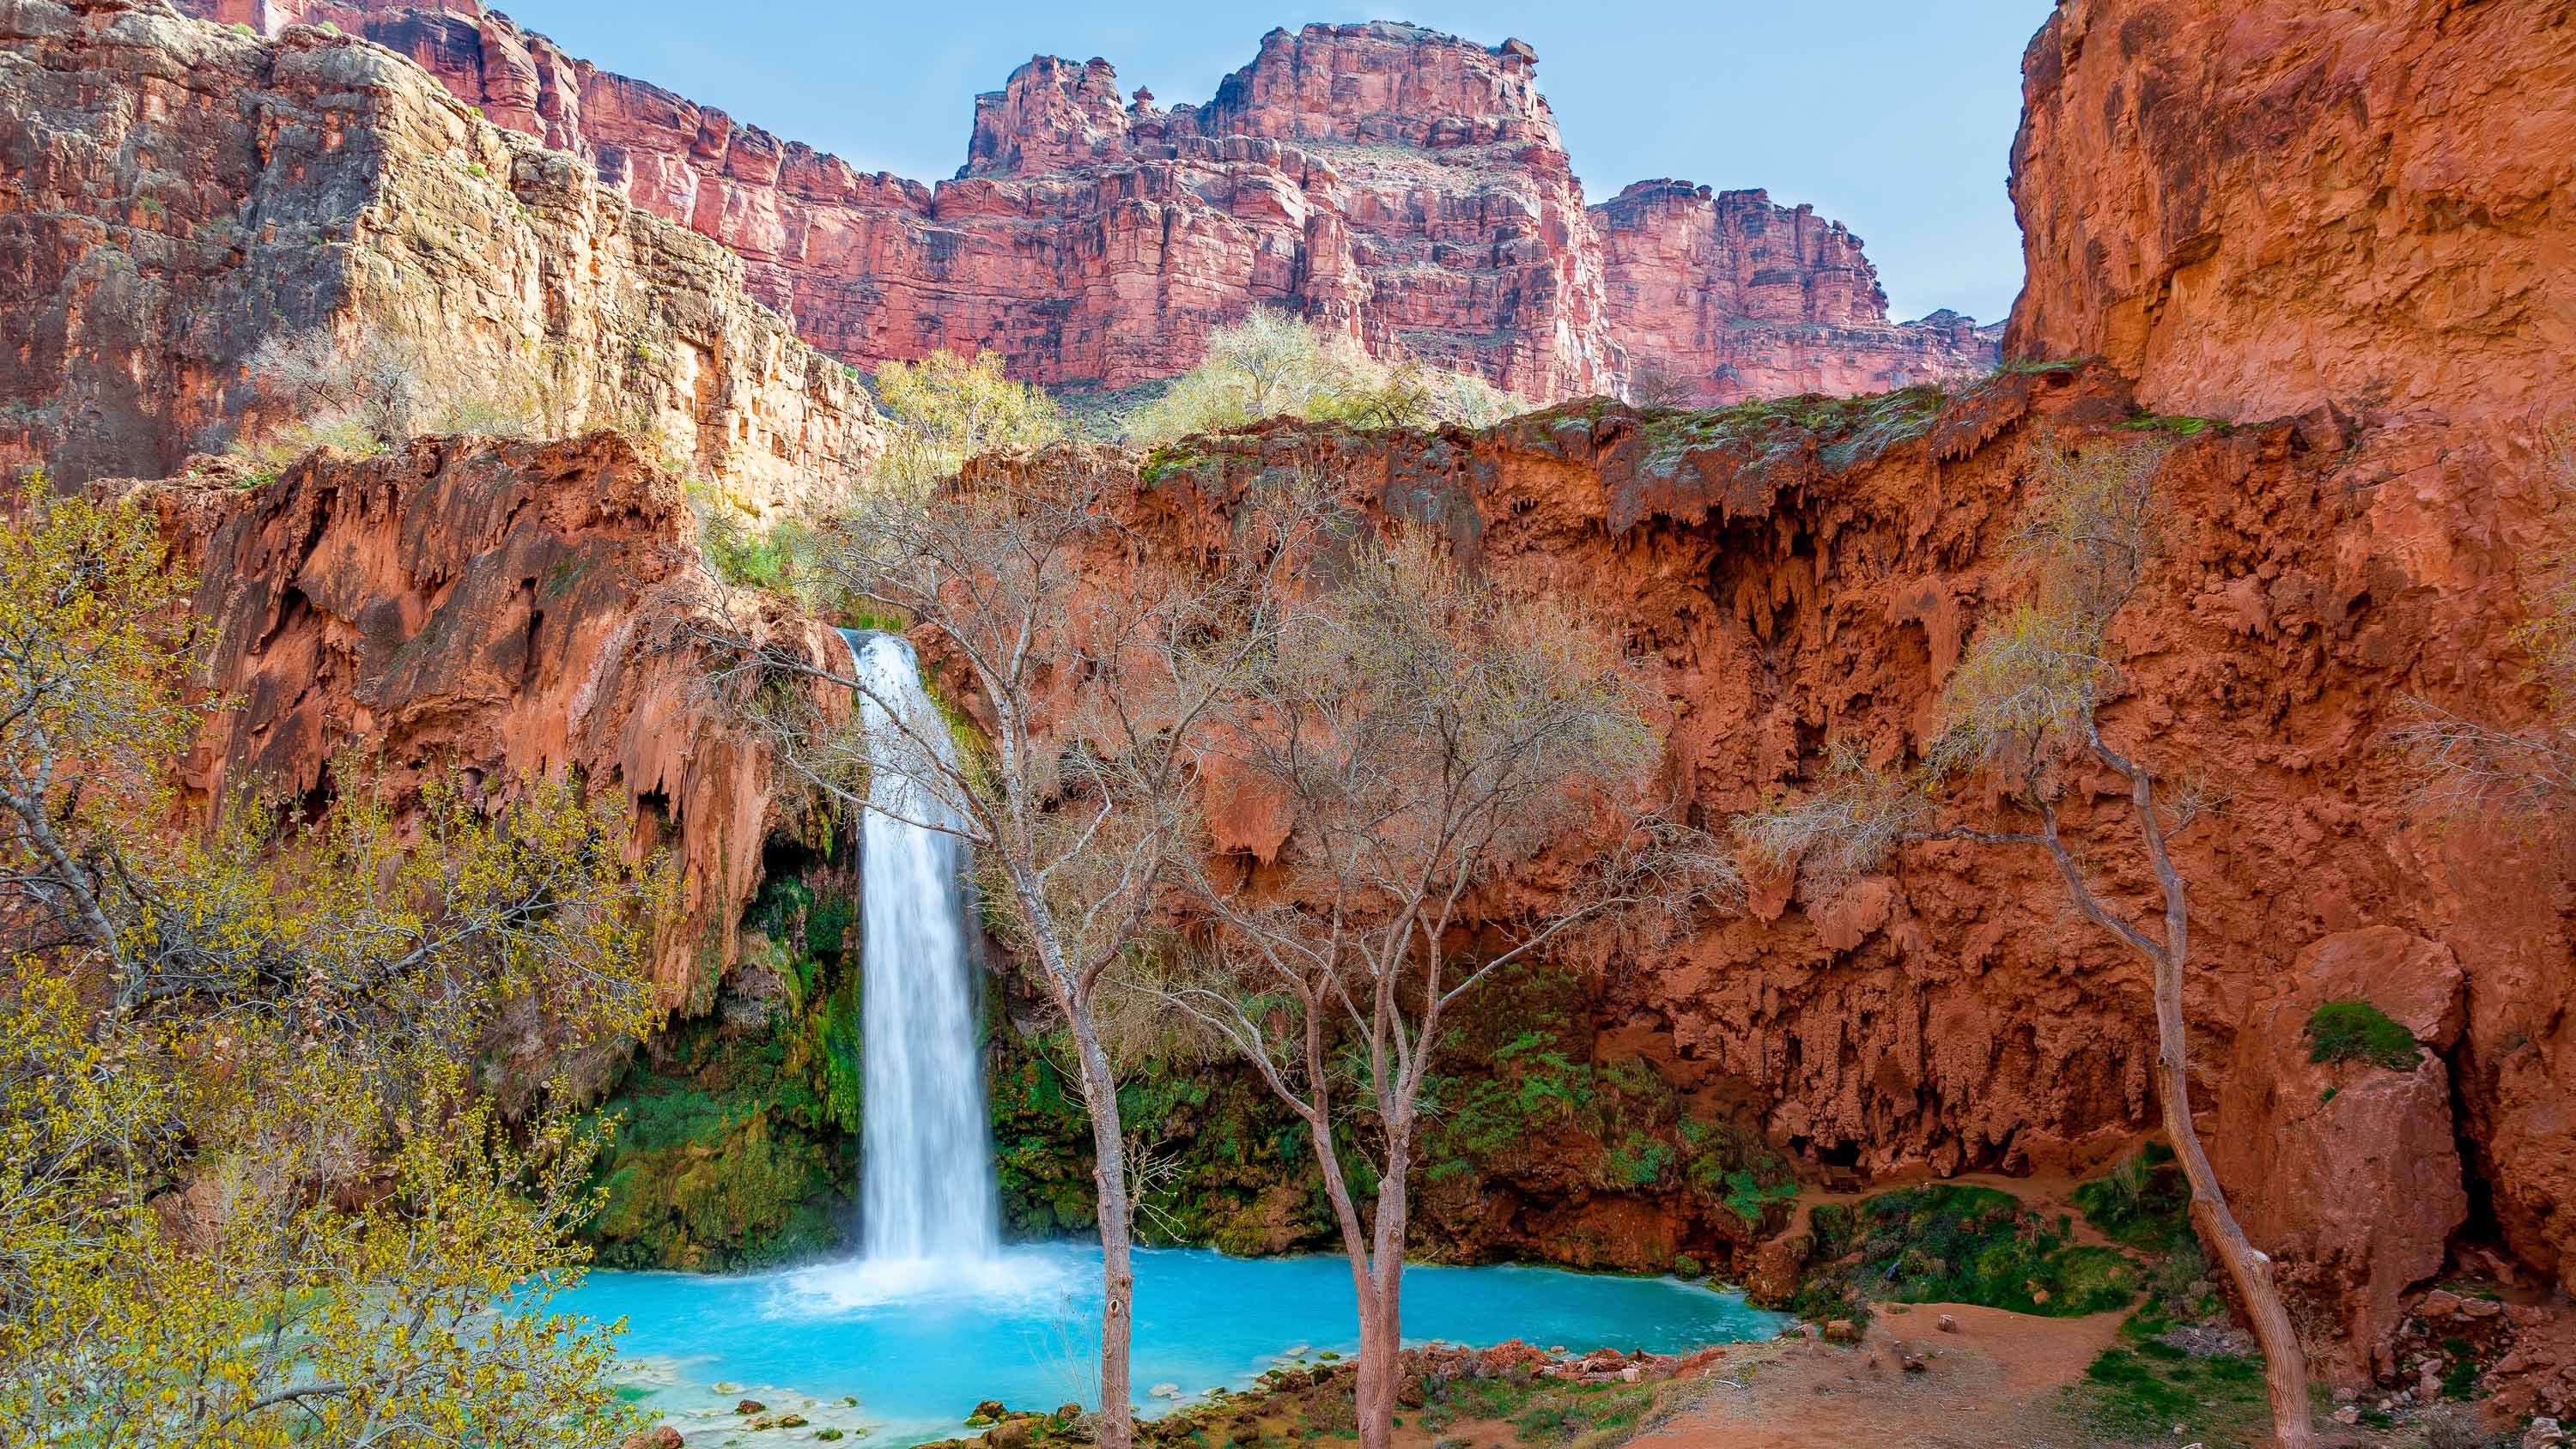 <p><strong>Estimated cost:</strong> $341</p> <p>Tucked in a side canyon at the bottom of the Grand Canyon, Supai Village is one of the quietest and most remote places in the lower 48 states, according to the USDA. Mail is still delivered by mule, and the village has little more than a cafe, lodge, store and museum.</p> <p>The main attractions are its remote places, which include tumbling blue-green waterfalls and pastel canyonlands. Swim in a sparkling natural pool beneath the 190-foot Mooney Falls, or have a picnic with 120-foot Havasu Falls as a backdrop. There's also a hike-in campground and trails leading to the Colorado River just 10 miles away.</p> <p><strong>How to get there:</strong> Fly to Las Vegas and rent a car for the 221-mile journey that will take you to Hoover Dam and along a stretch of Route 66. Spend the night at Peach Springs before tackling the last 64 miles of dirt road to Hualapai Hilltop.</p>